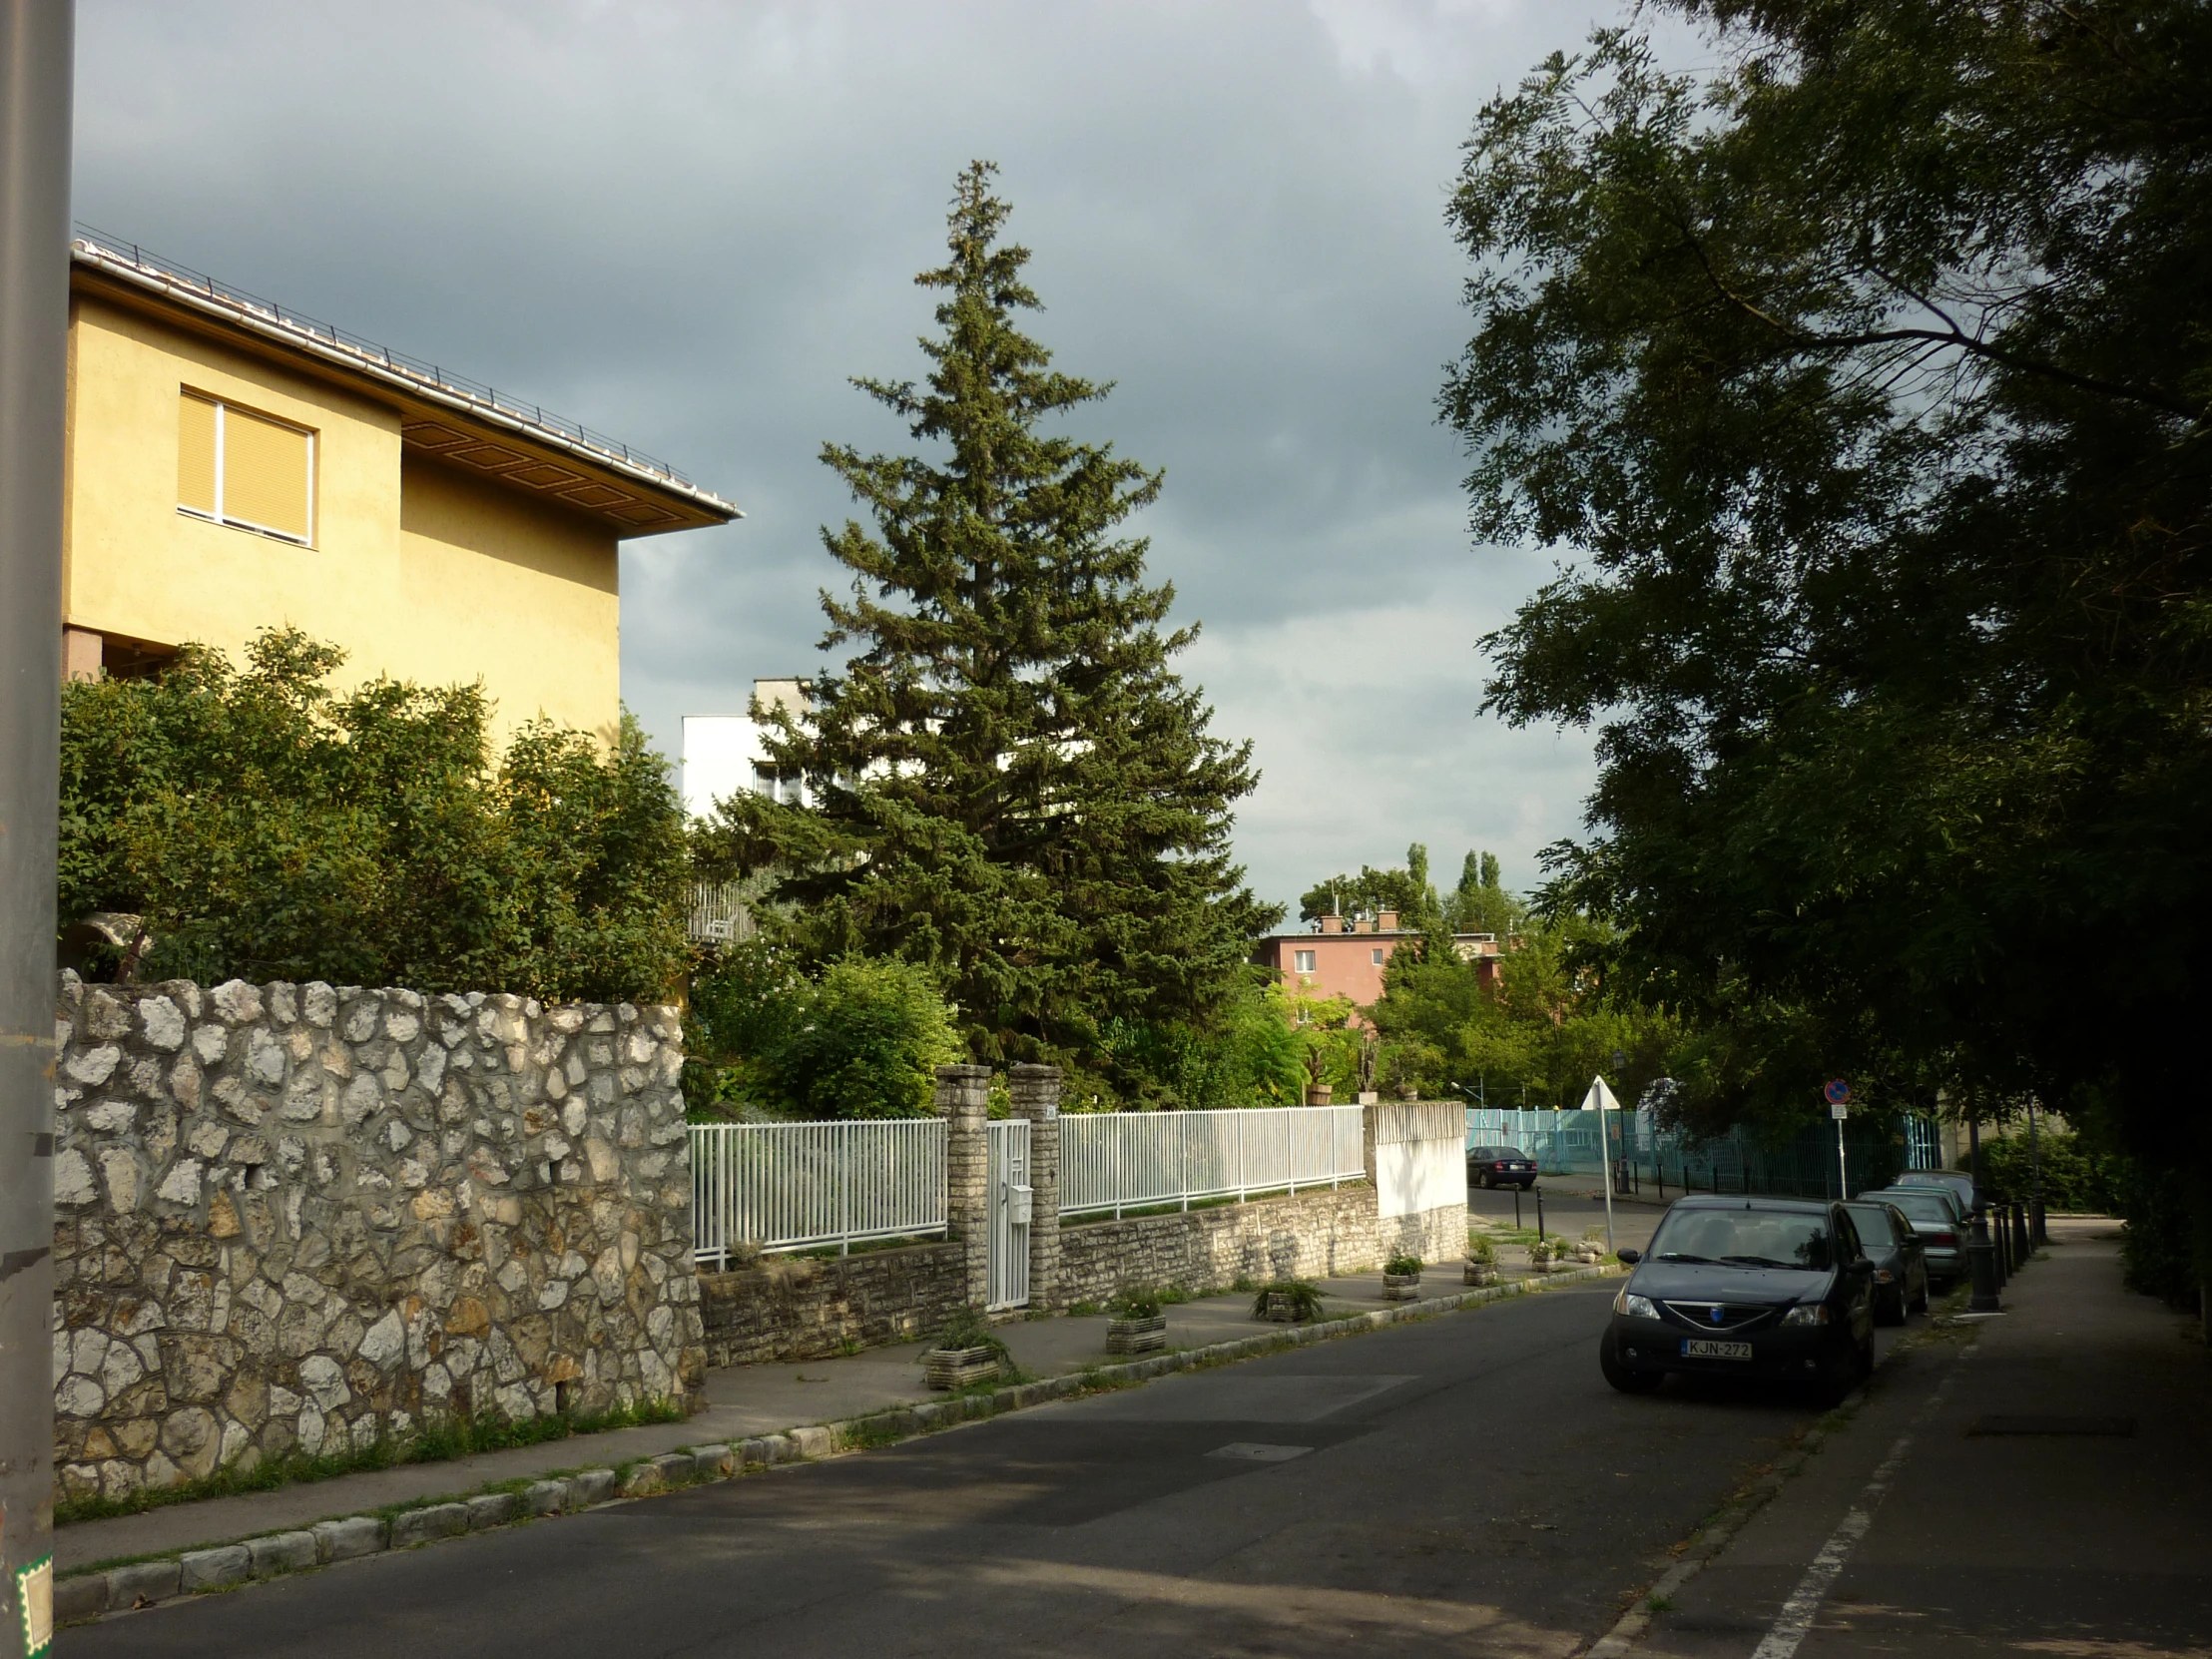 a stone fence surrounds a quiet street lined with cars